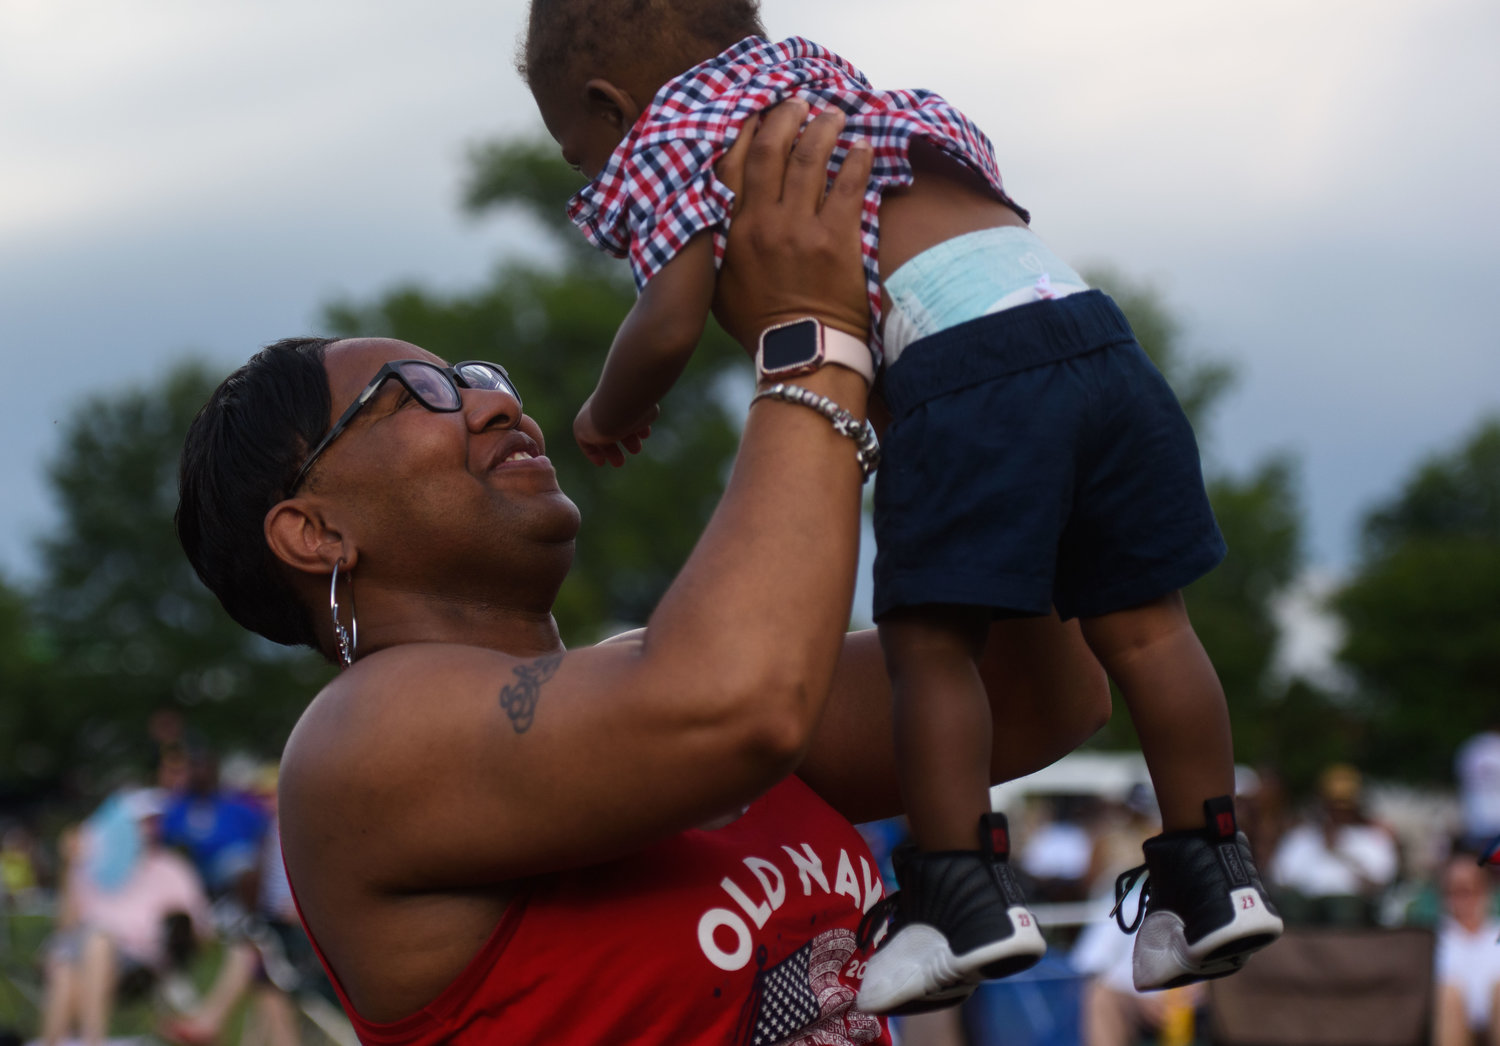 Denise McMillan lifts 1-year-old Jasia Grant while spending time with friends at Festival Park during the Independence Day celebration in Fayetteville on Monday.